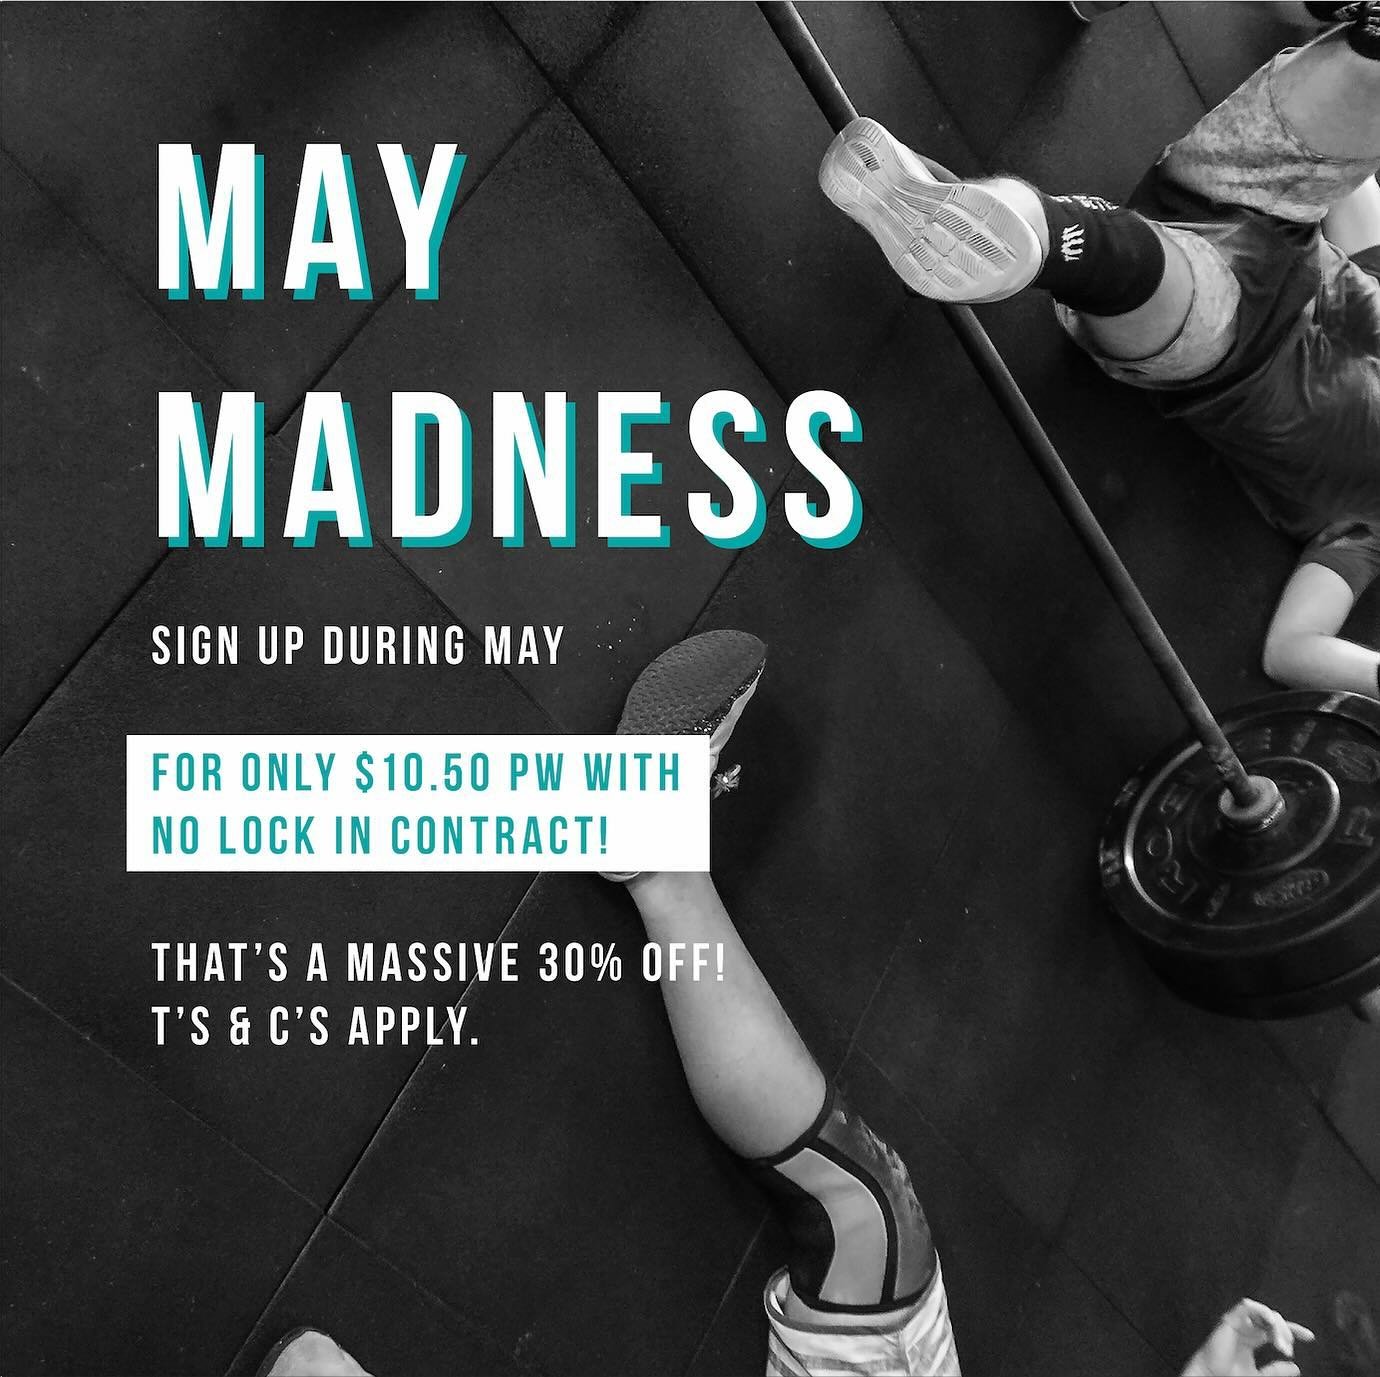 🚨 OUR MAY MADNESS SALE IS HERE 🚨

Sign up to direct debit in May for only $10.50 per week with no contract. That's a huge 30%off!! 

Terms and conditions apply, message us for further details.